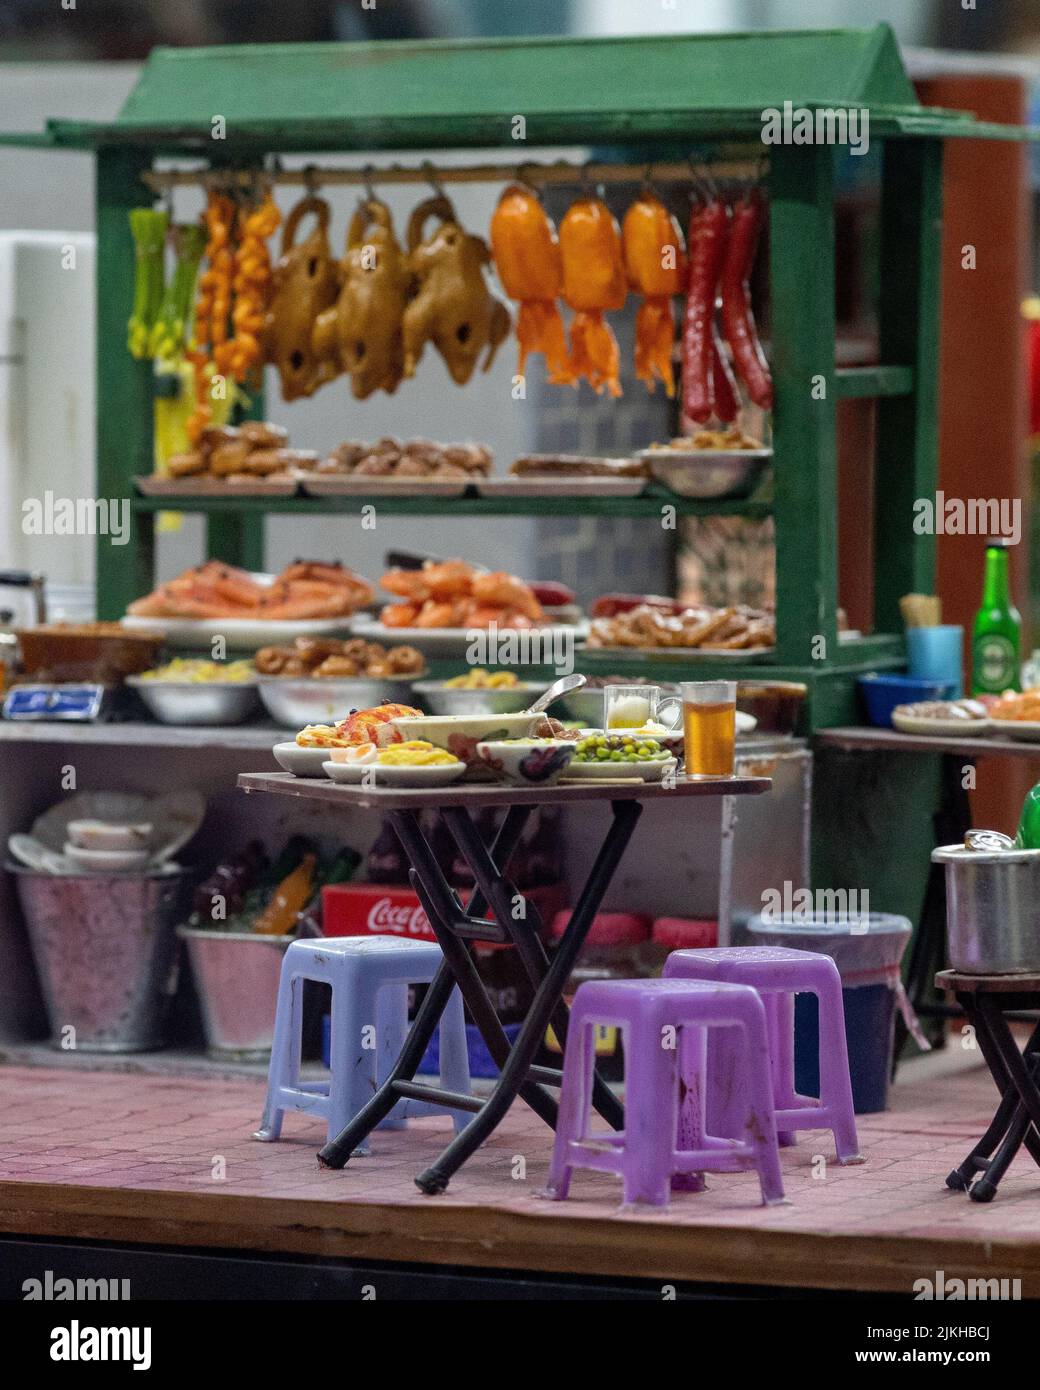 A vertical shot of a toy design of a kiosk with street food and a table with food and plastic chairs Stock Photo